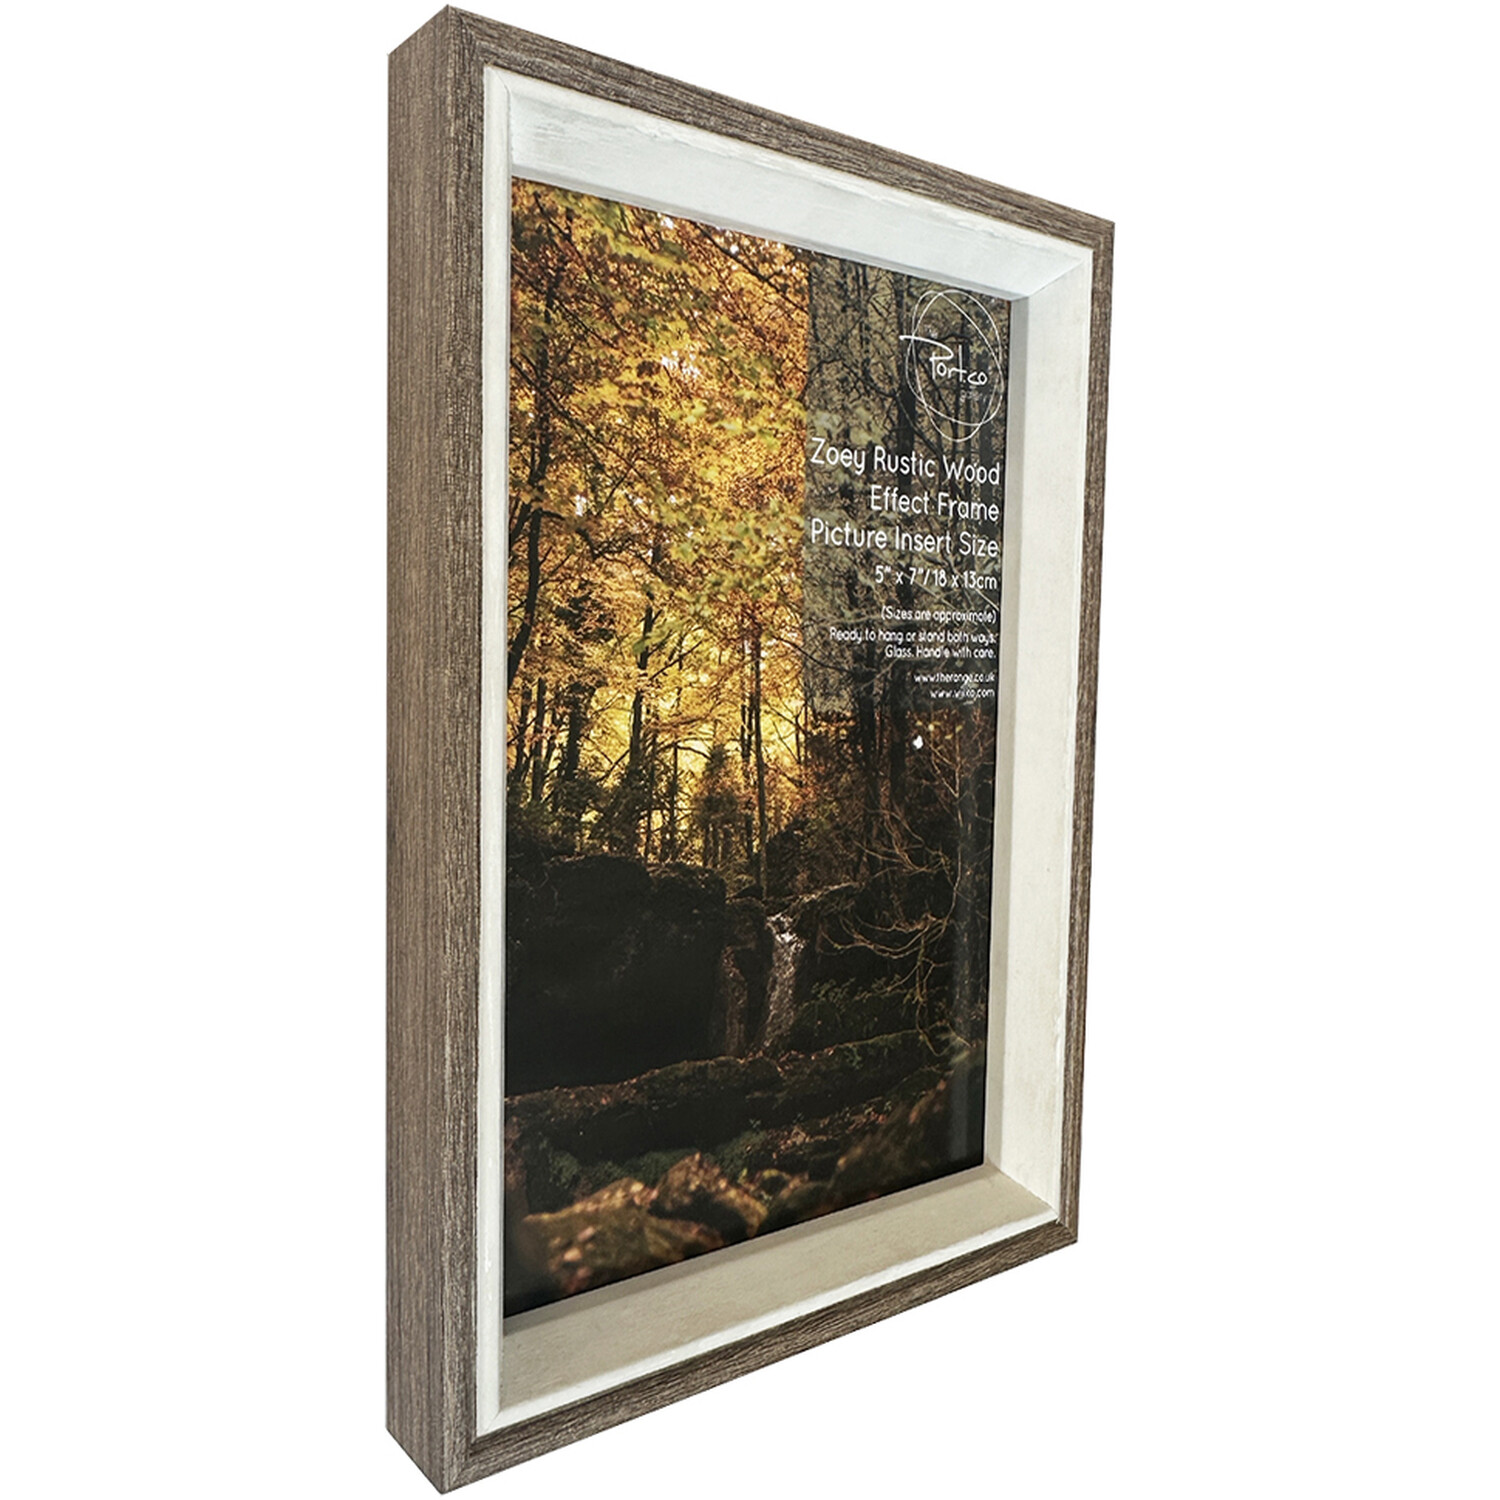 Zoey Rustic Wood Effect Frame - Brown / 7x5in Image 2